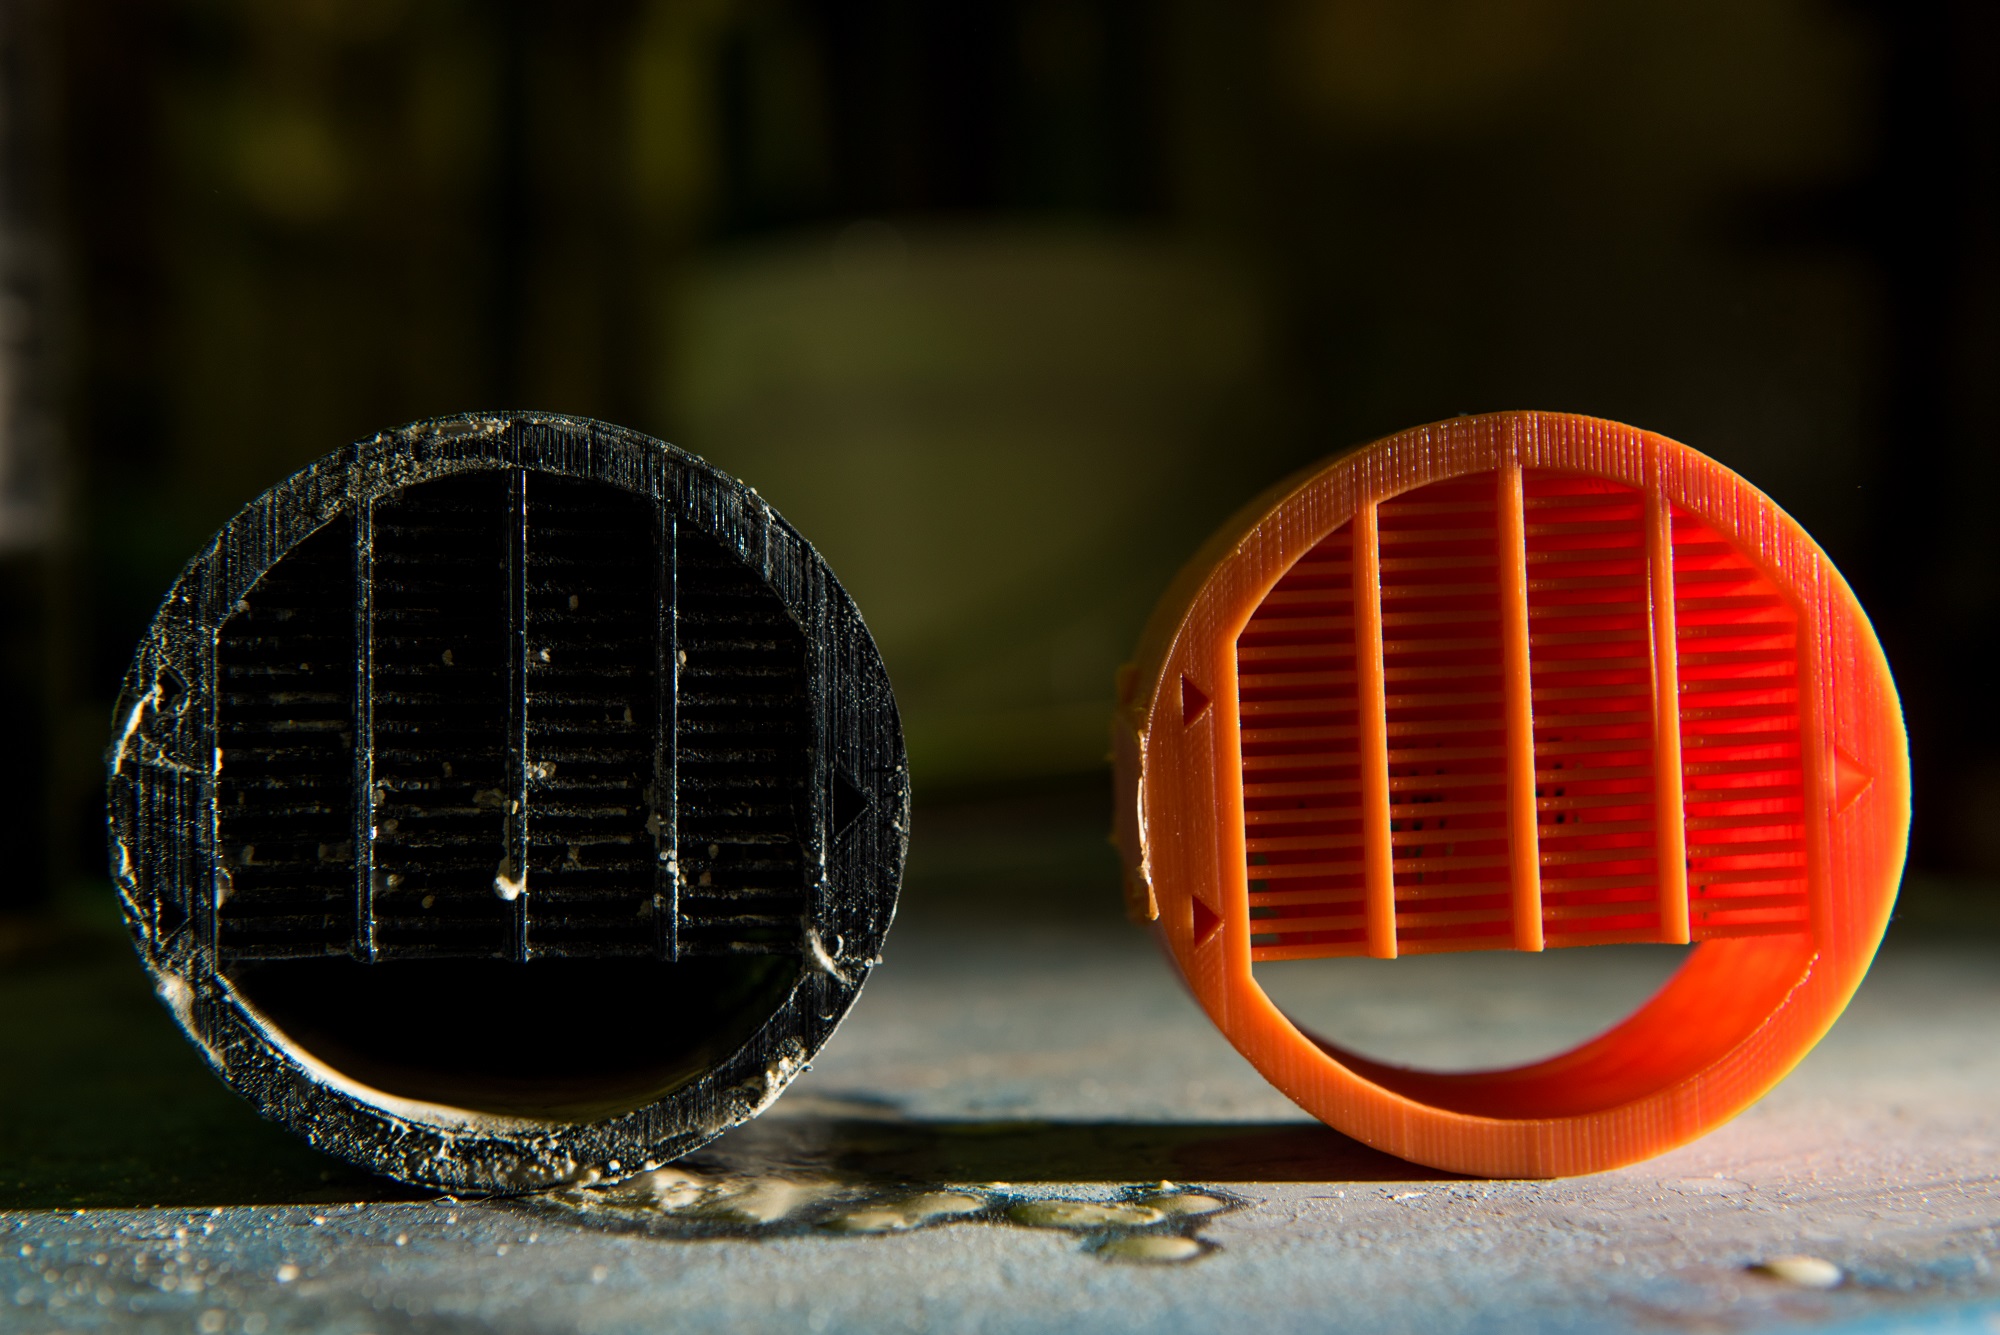 Closup of two separator pucks (one black, one orange), showing how the pattern of posts inside sort out particles